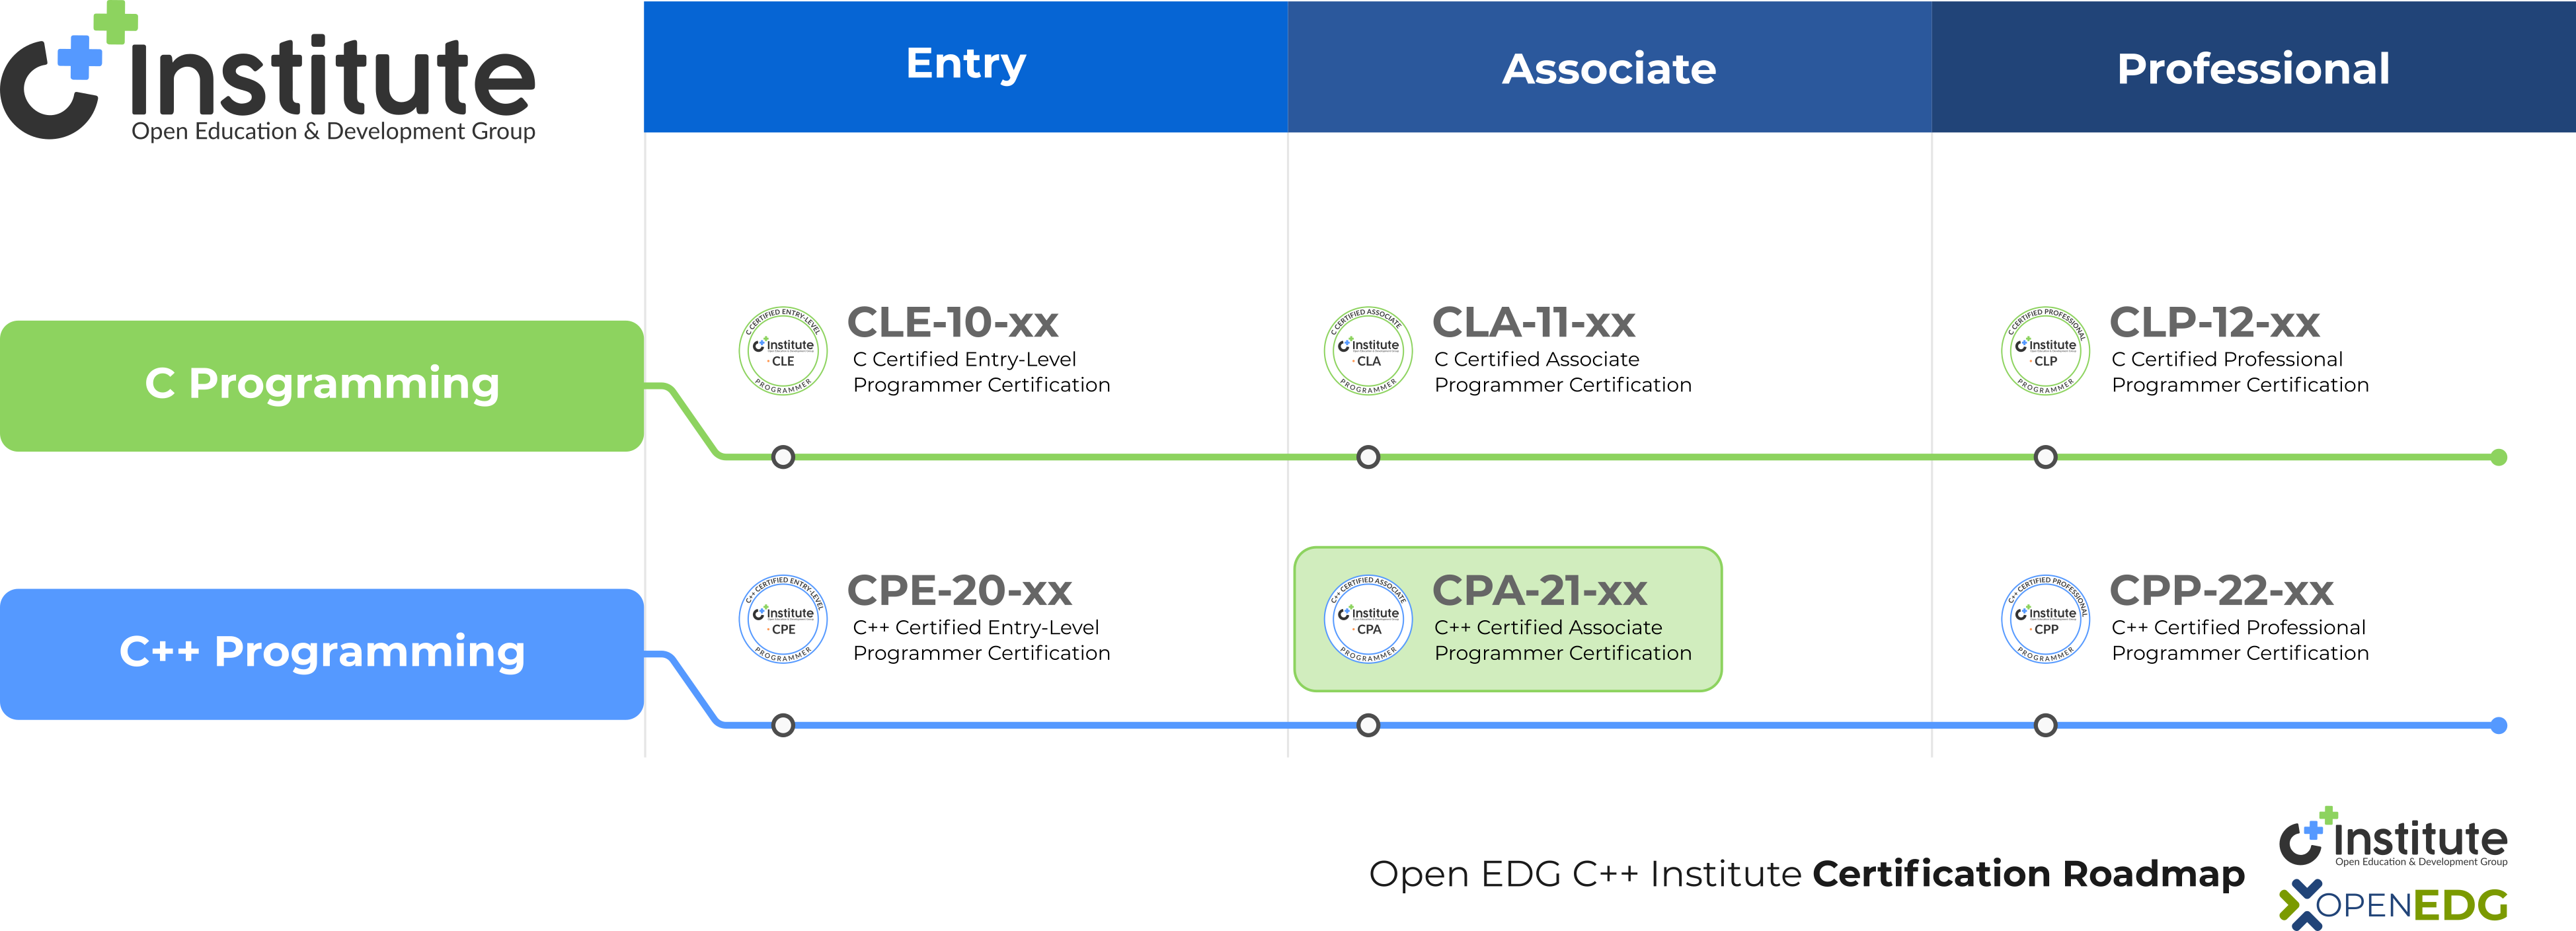 CPA exam on Certification Roadmap